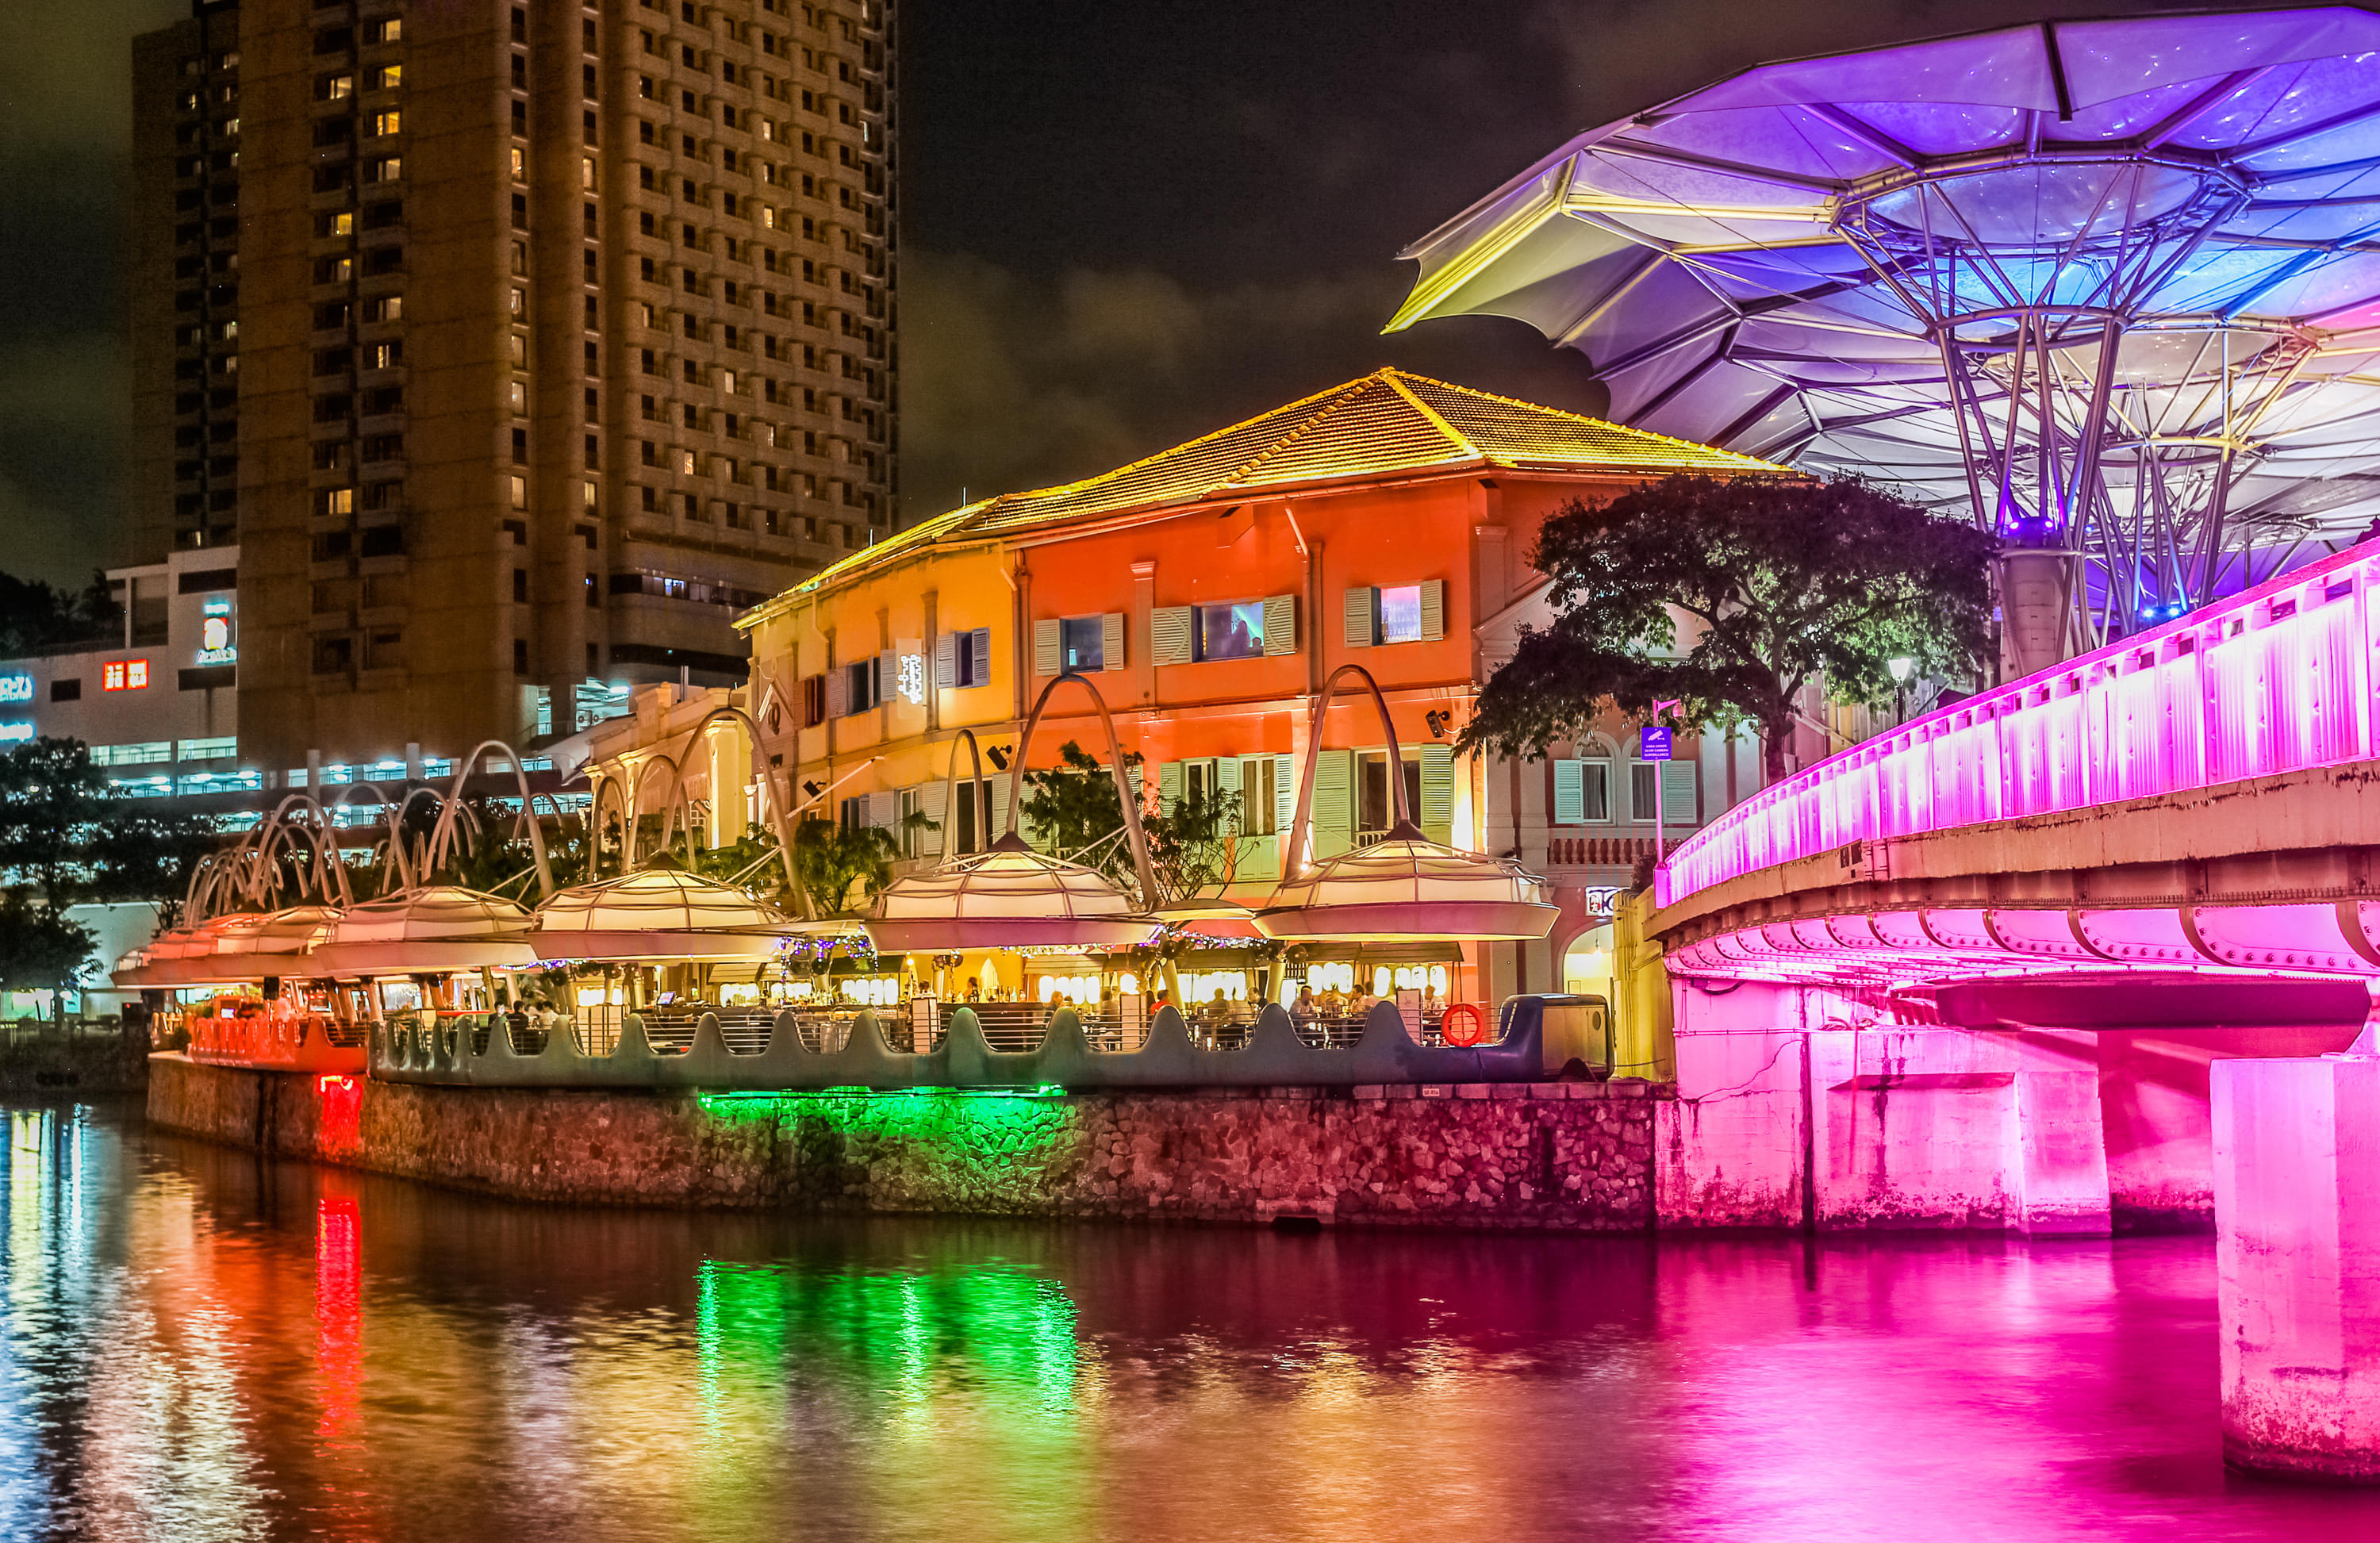 Singapore River Dining Cruise